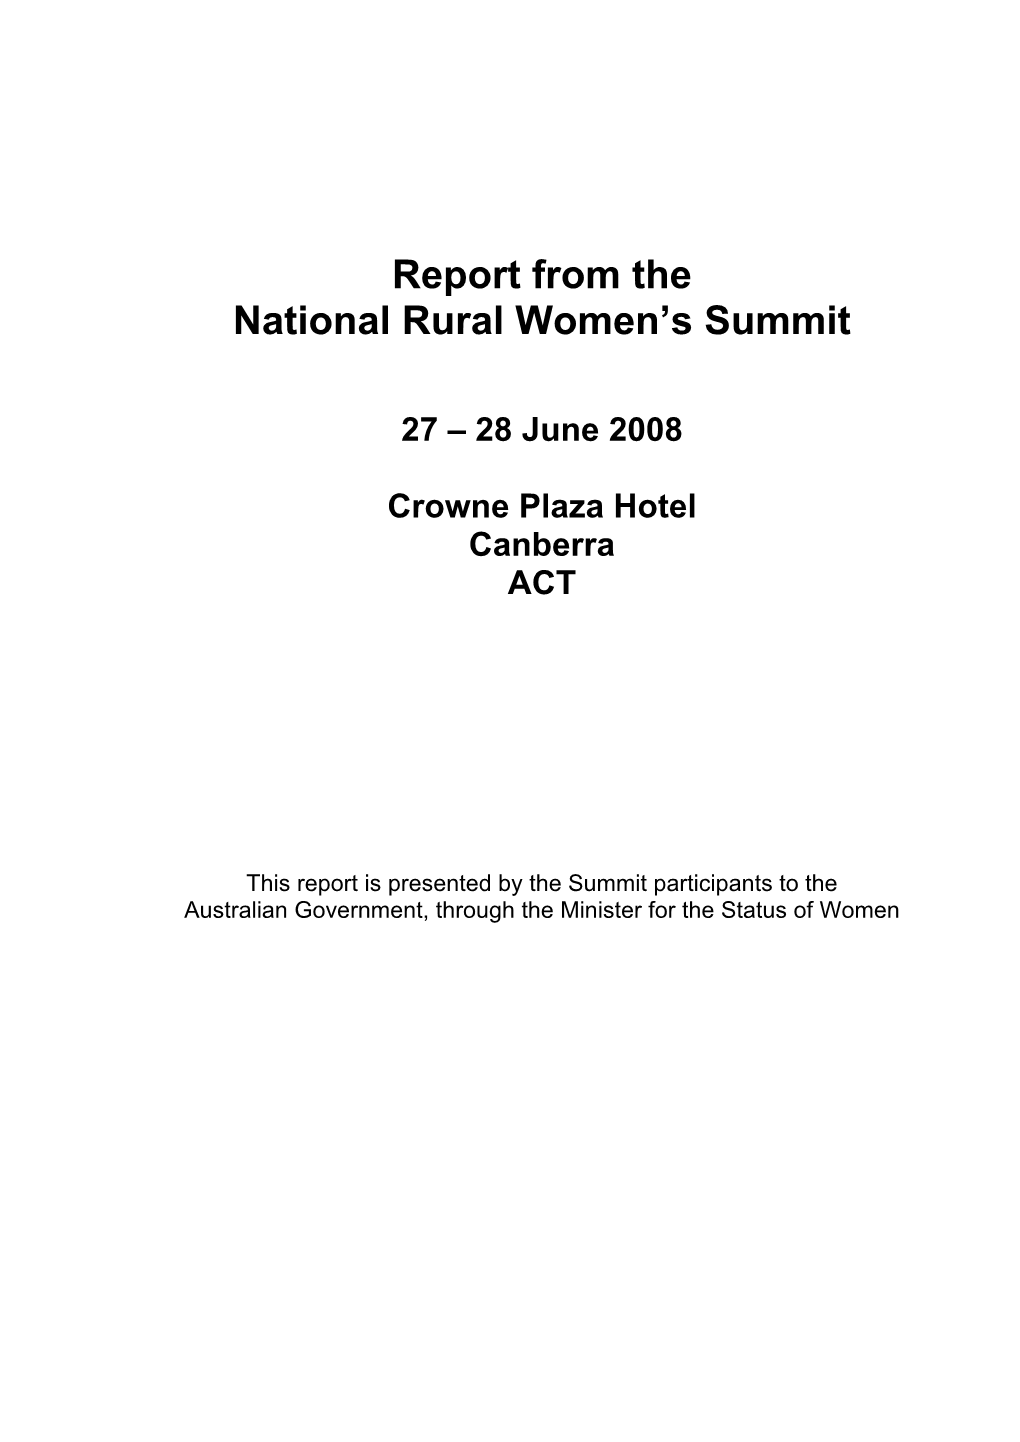 Report from the National Rural Women's Summit